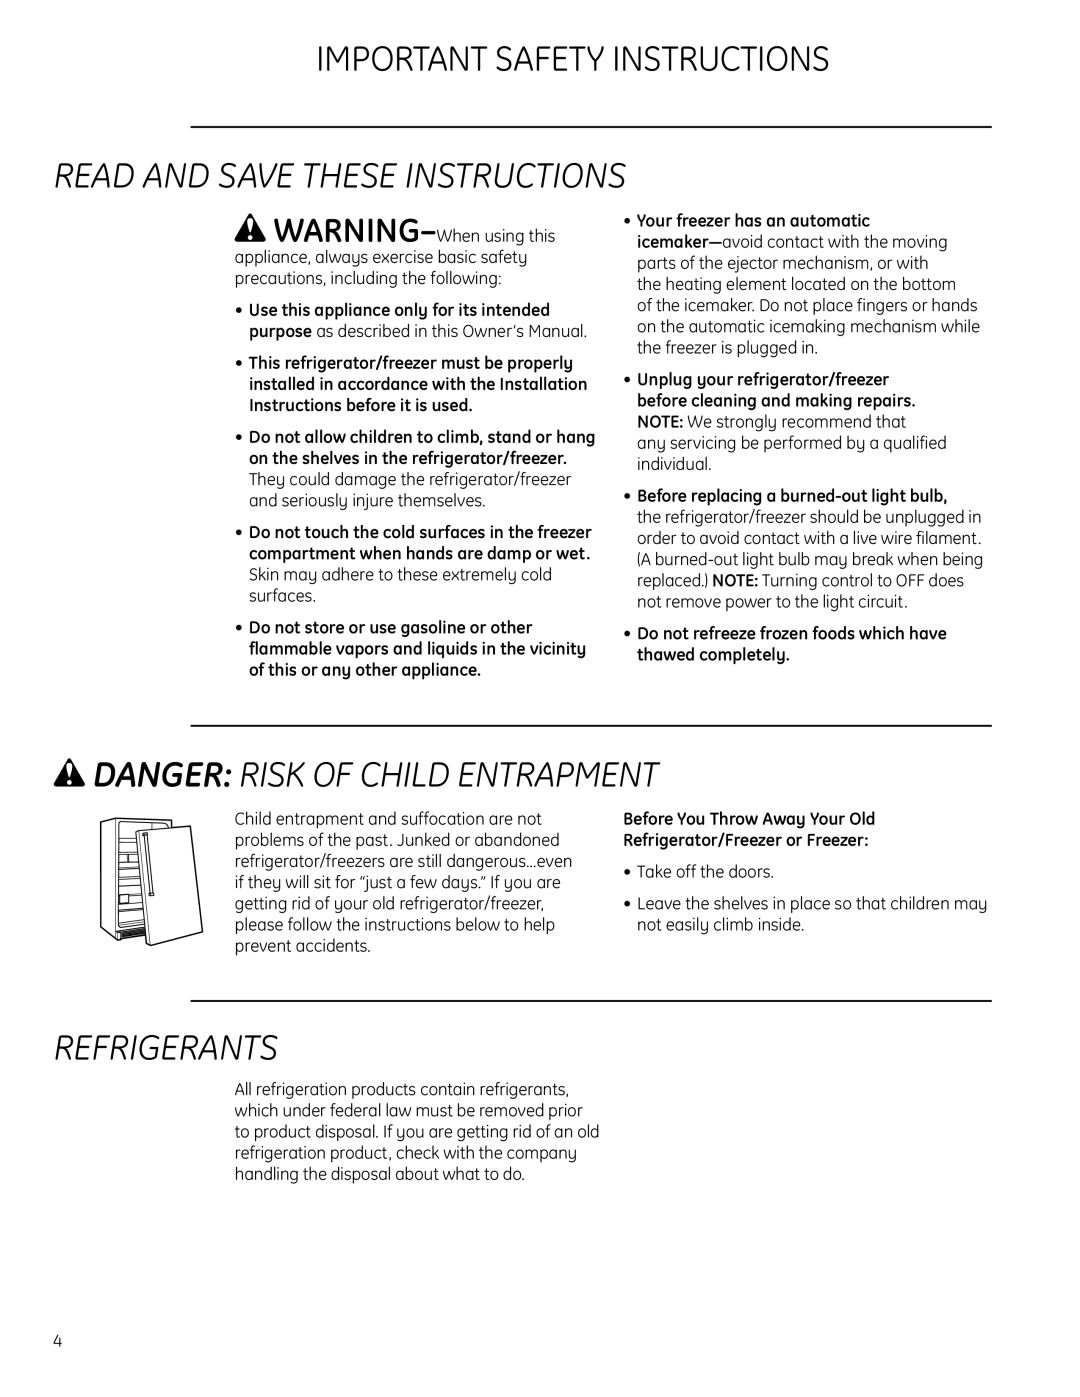 GE Monogram All-Refrigerators and All-Freezers owner manual Important Safety Instructions, Read And Save These Instructions 